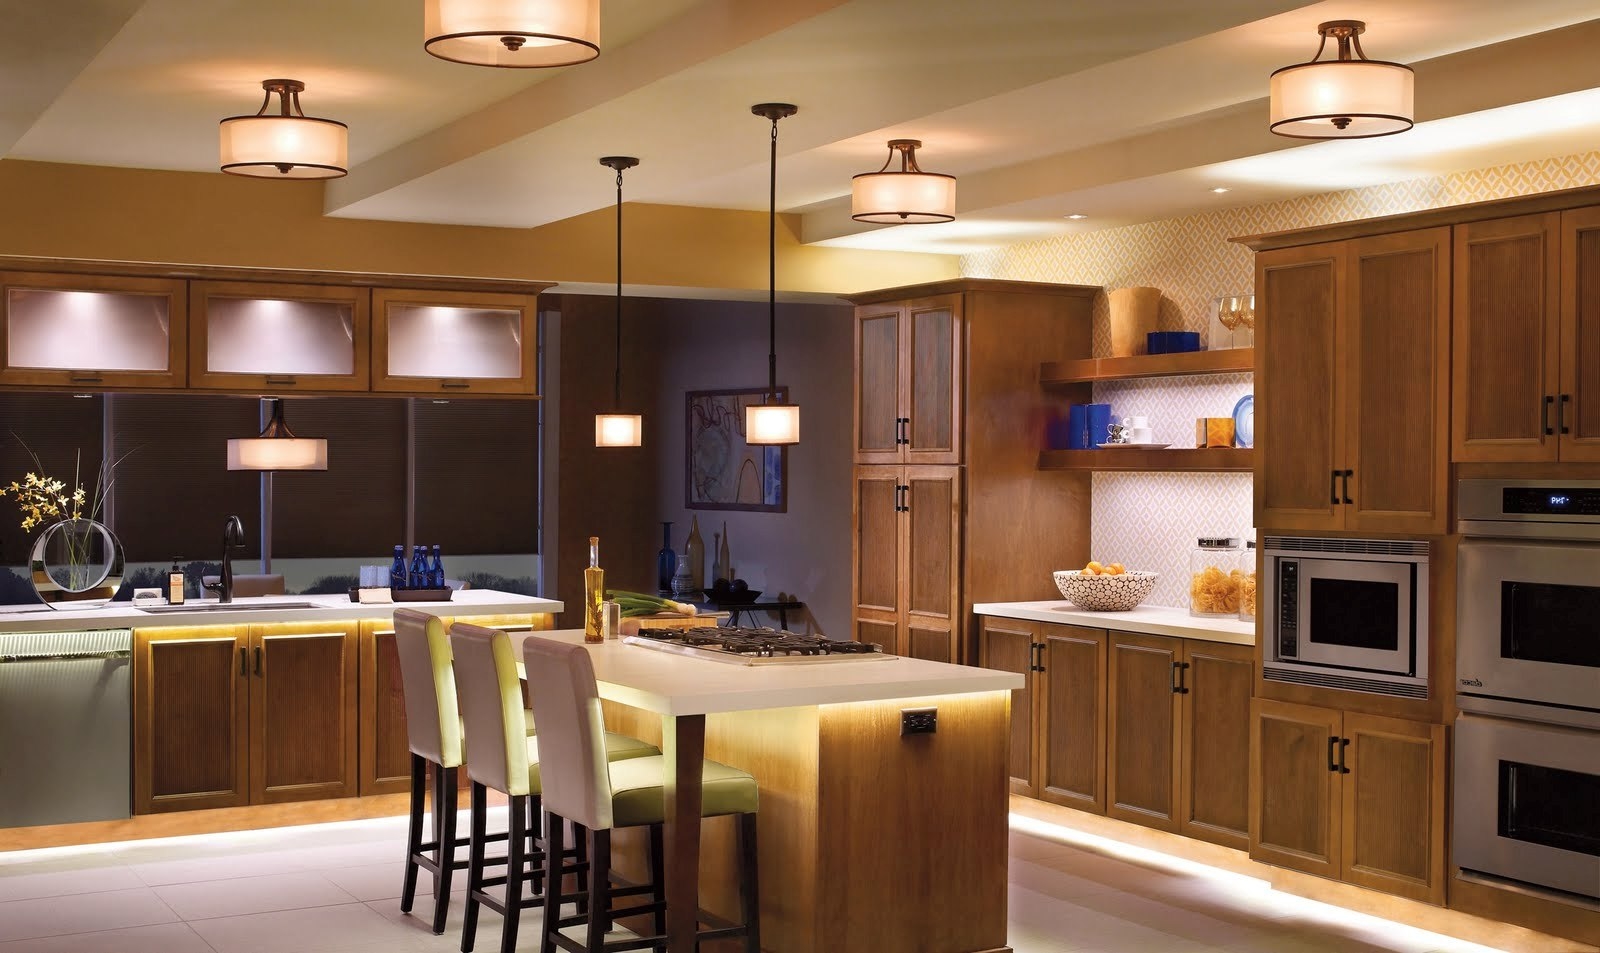 Permalink to Lighting Ideas For Kitchen Ceilings